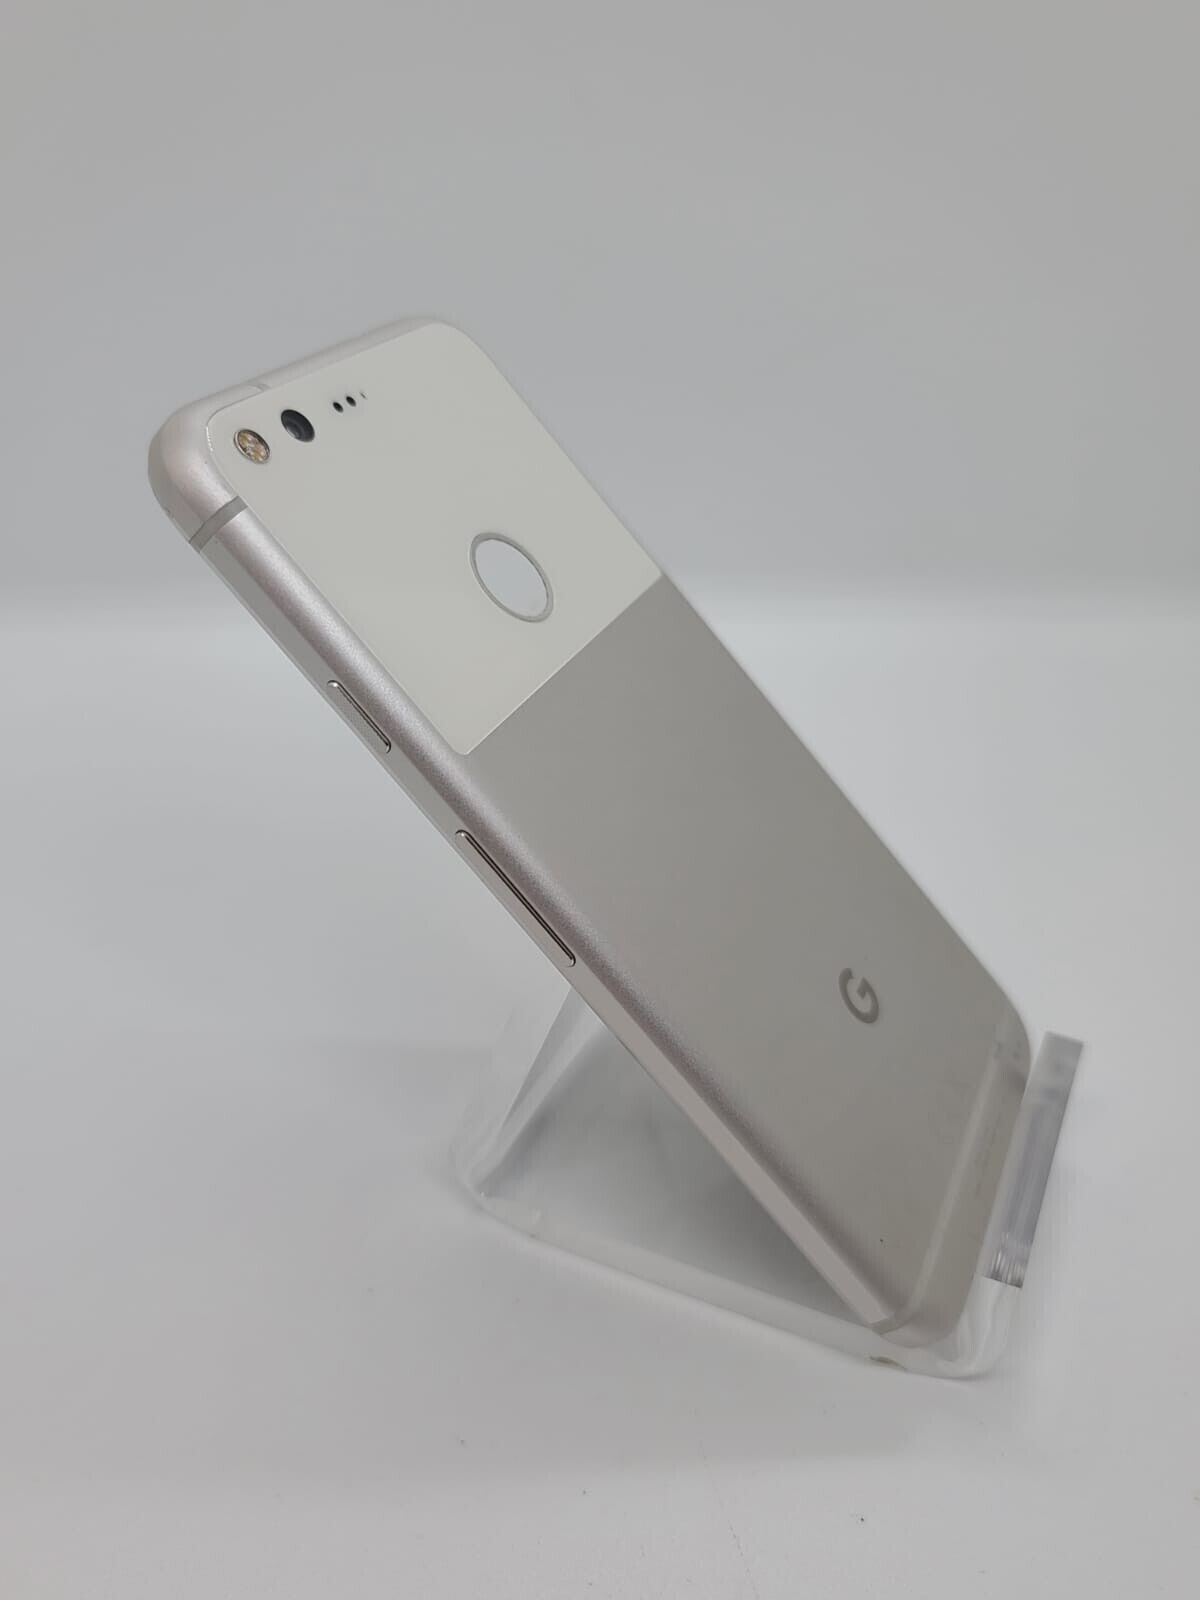 Google Pixel 32GB Android 4G LTE Smartphone G-2PW4100 FOR PARTS WORKING